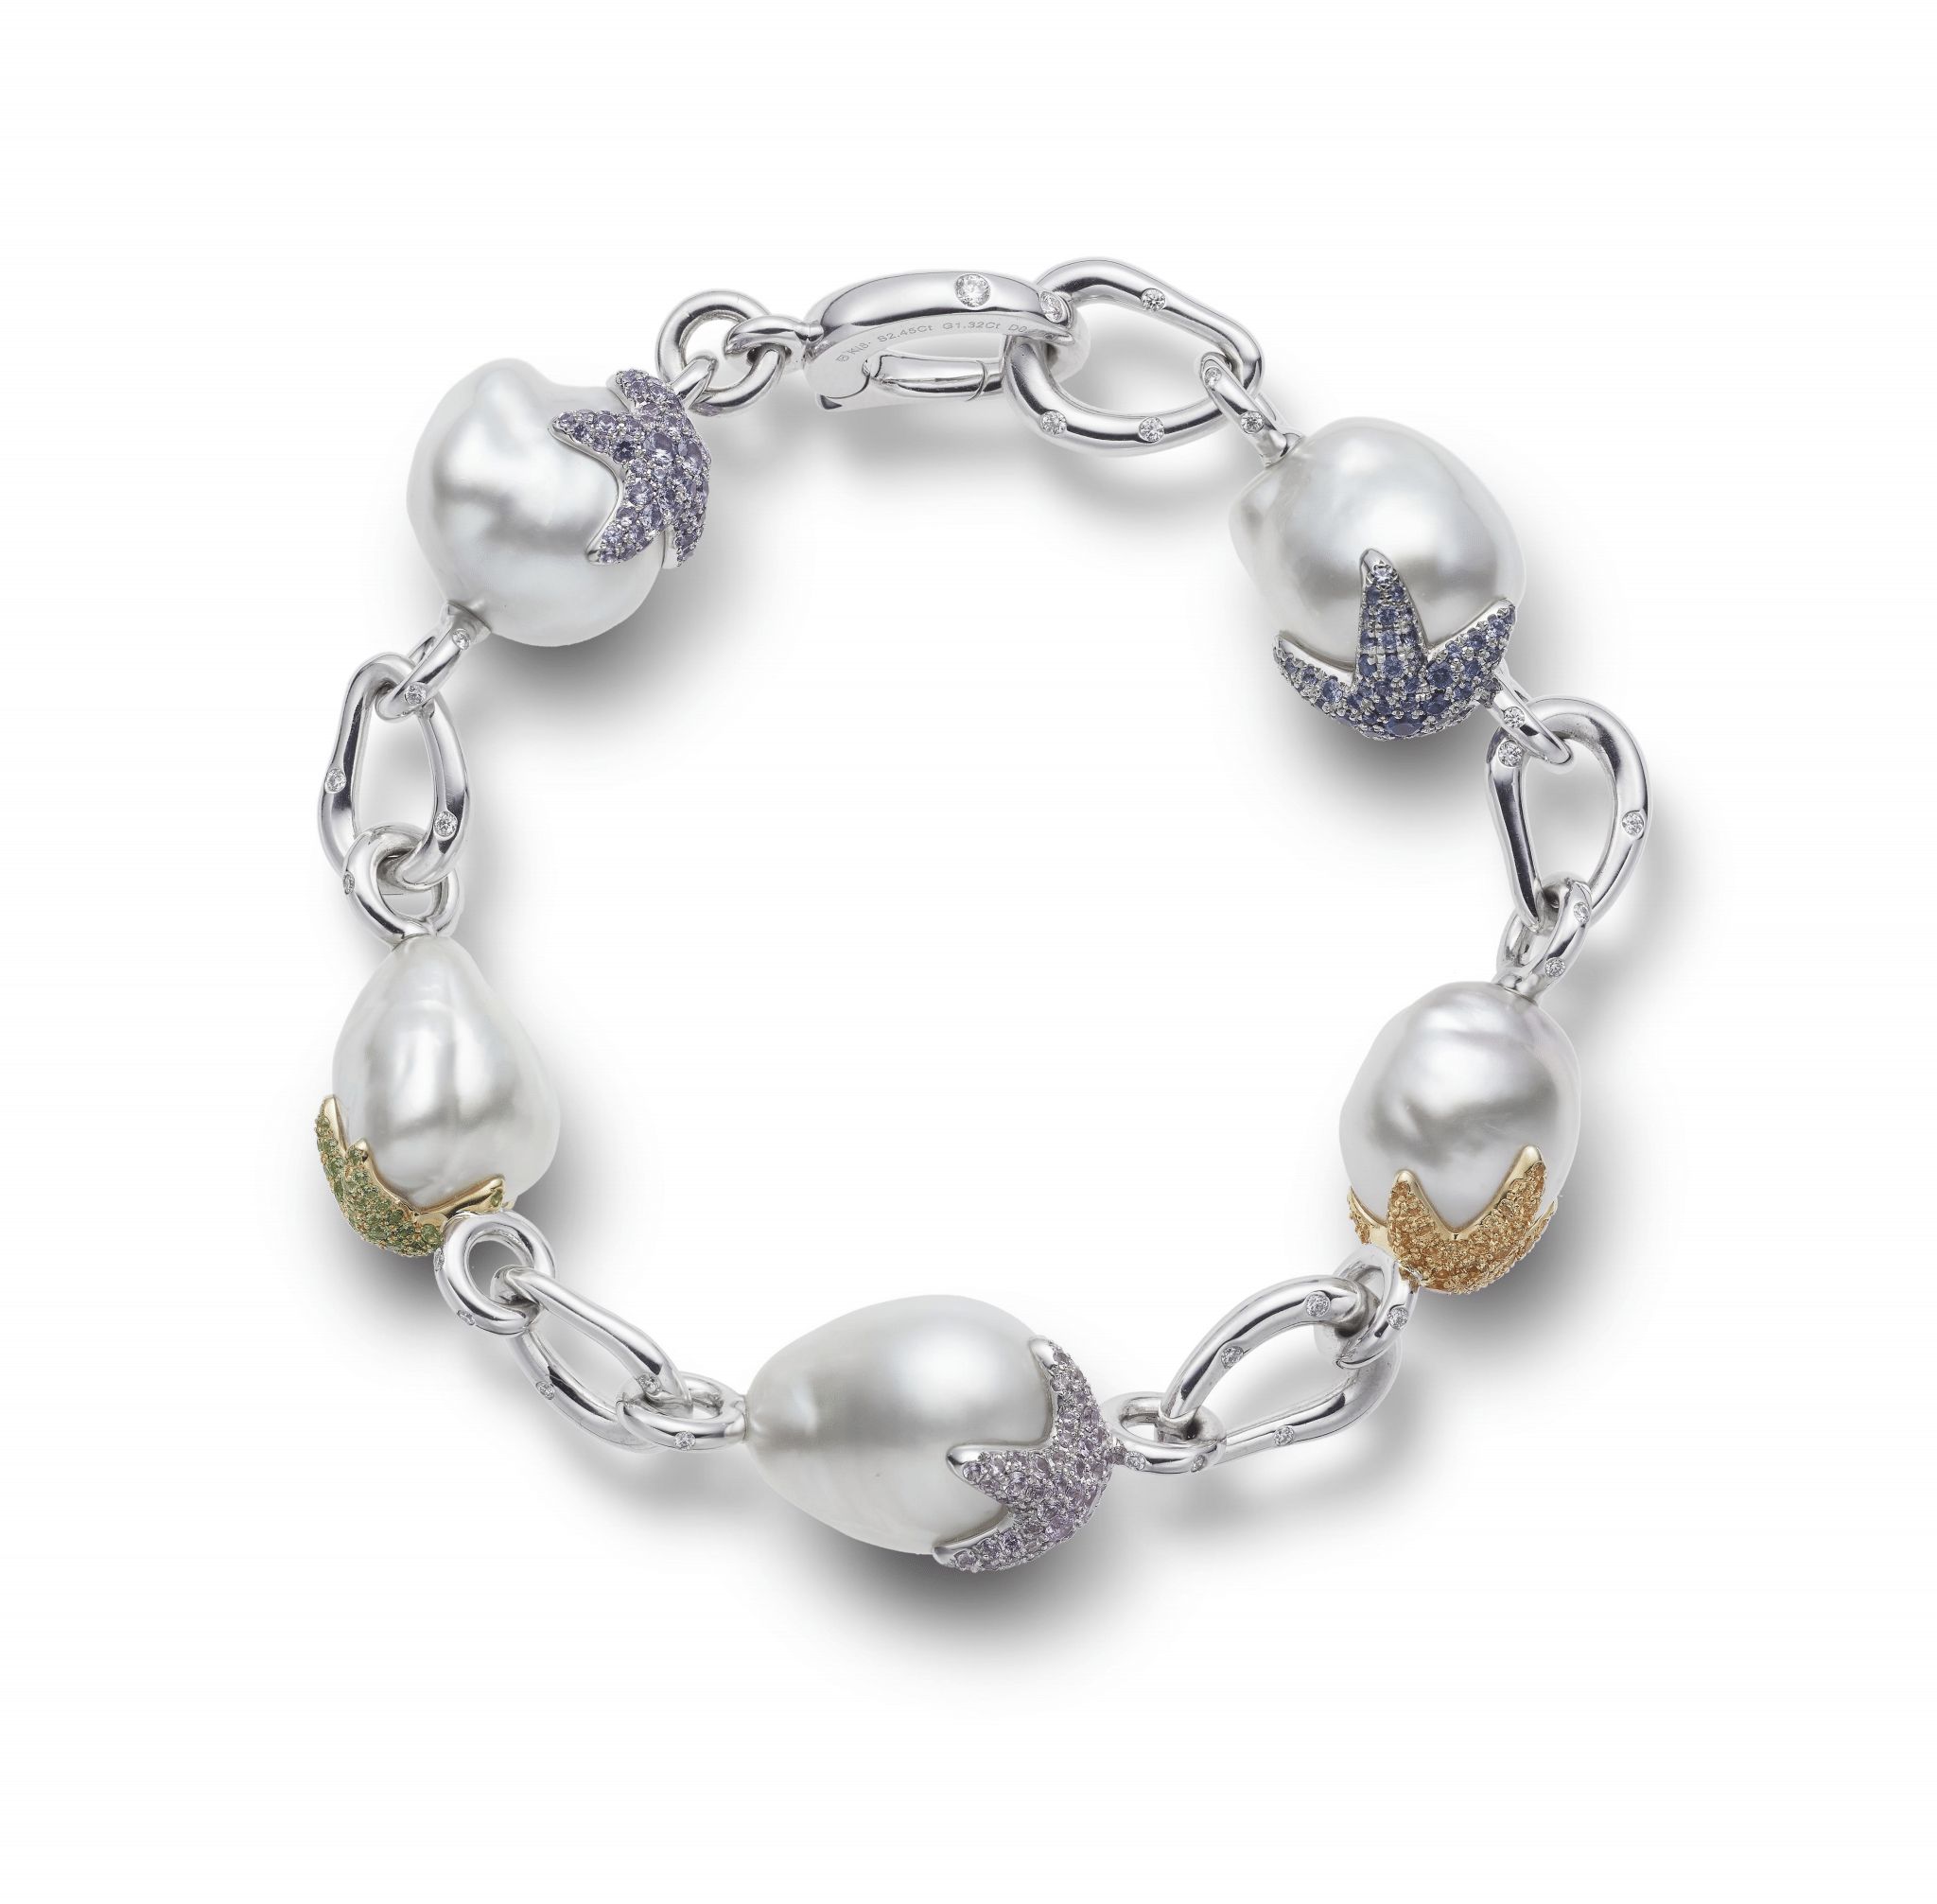 Mikimoto baroque South Sea pearl bracelet with coloured gemstone starfish accents from the Praise to the Sea High Jewellery collection